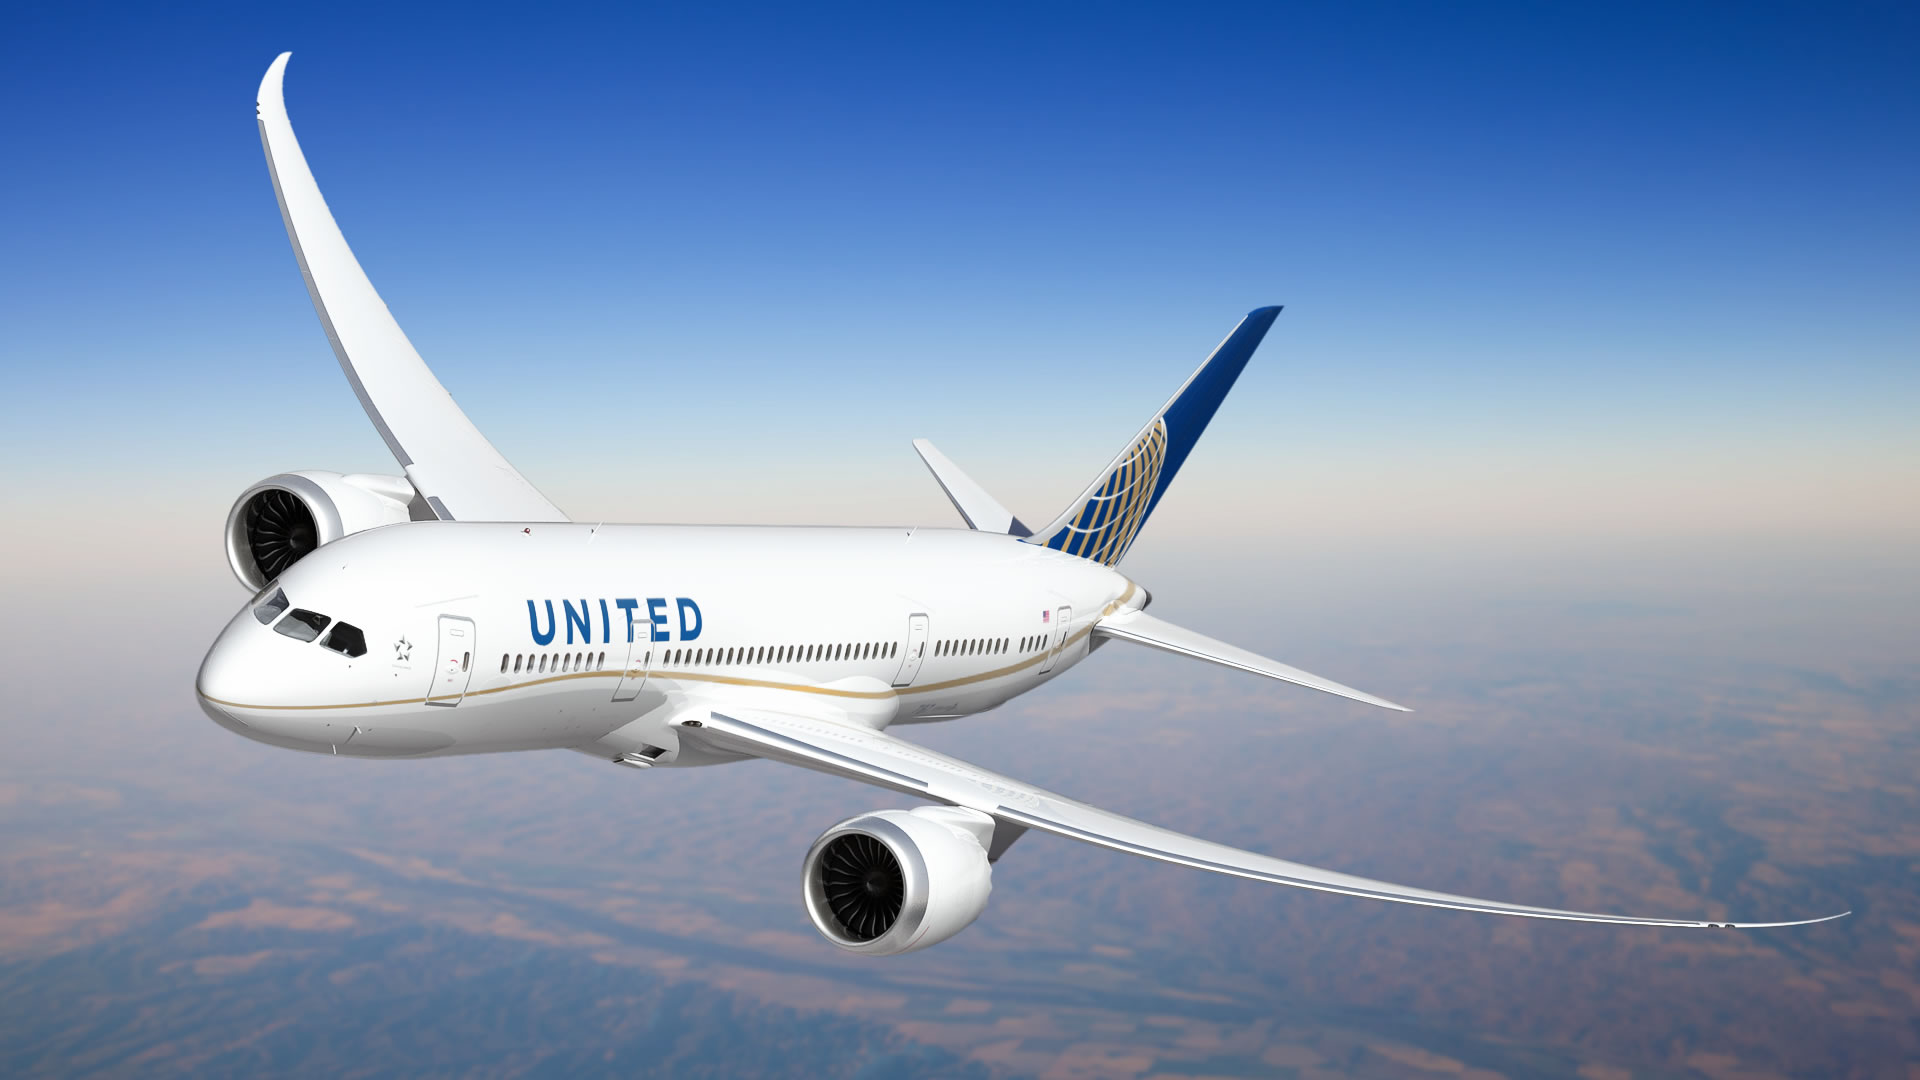 united-airlines-unveils-special-livery-for-787-dreamliner